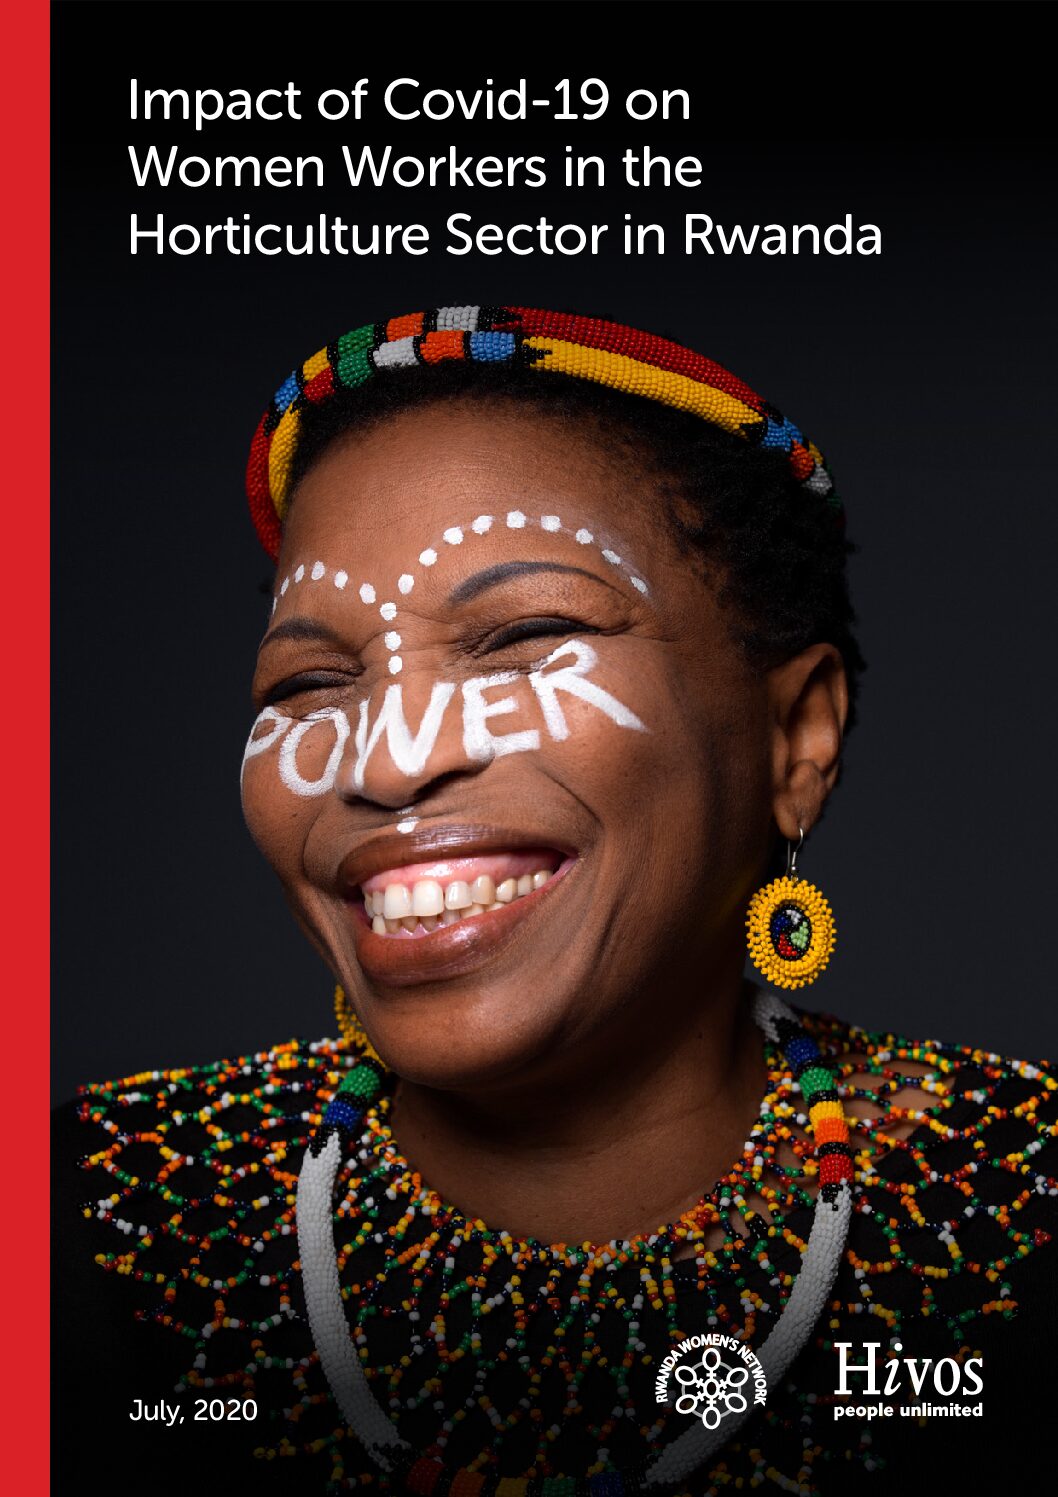 Impact of Covid-19 on Women Workers in the Horticulture Sector in Rwanda